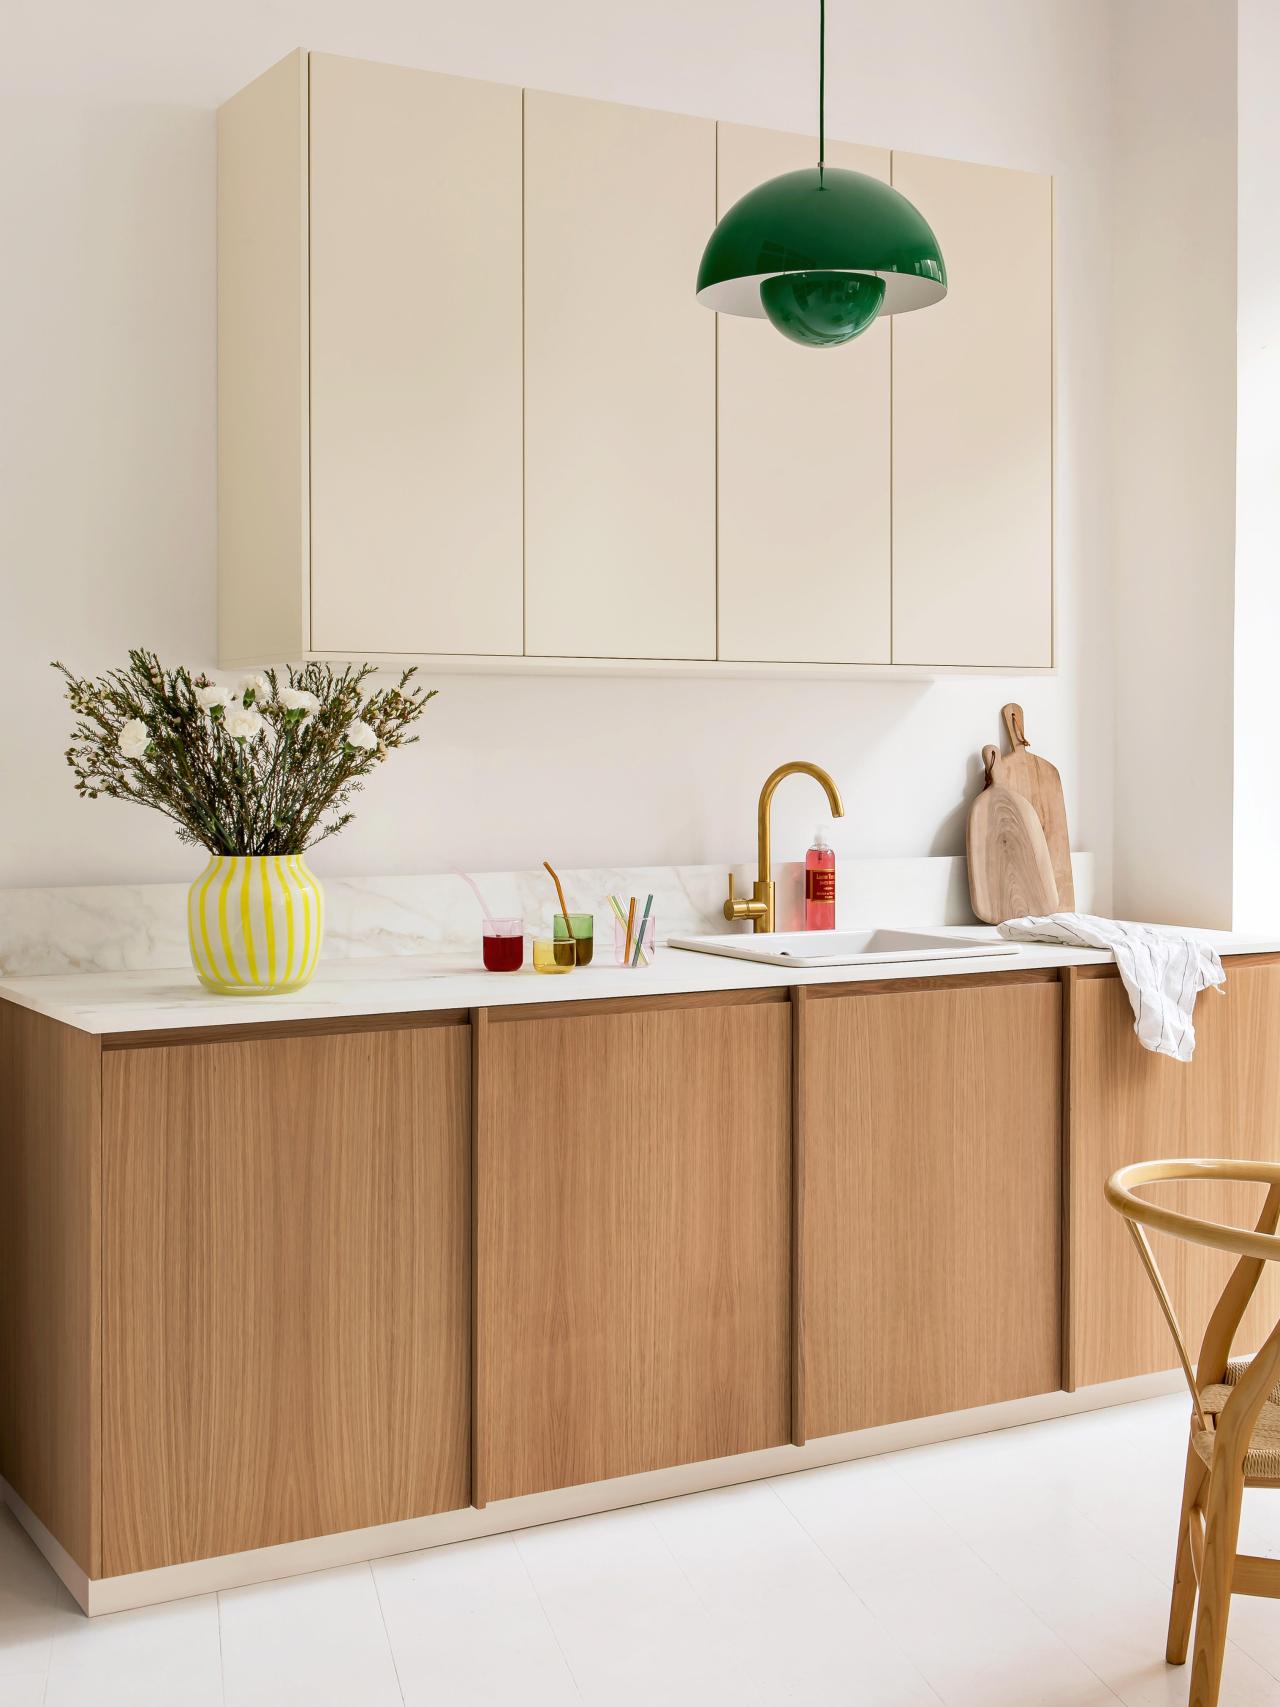 Ivoire and Vert sauvage kitchen, with rounded open cabinet